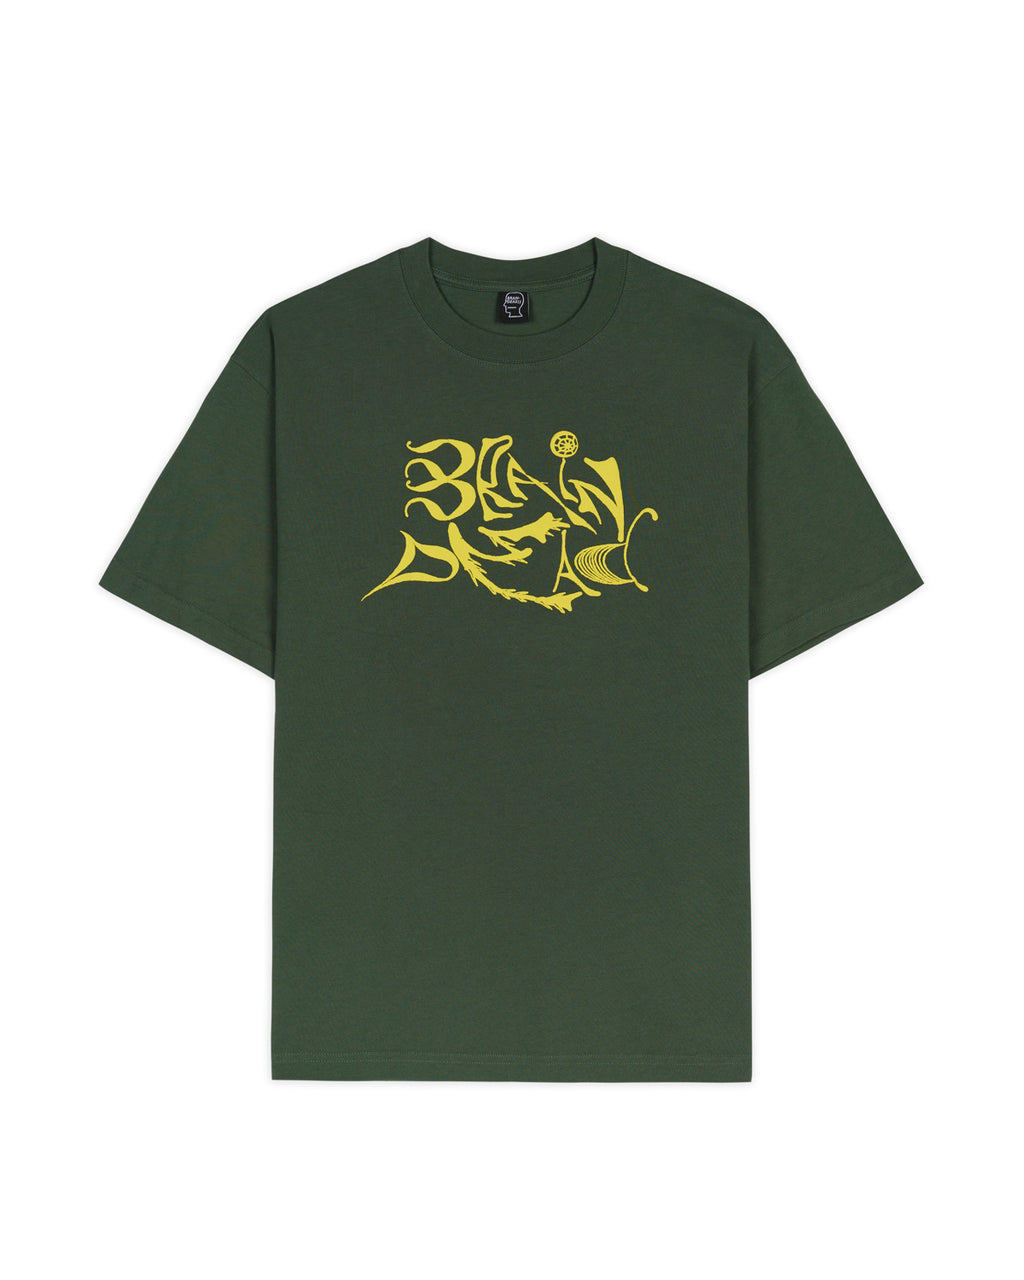 New Age T-shirt - Green 1